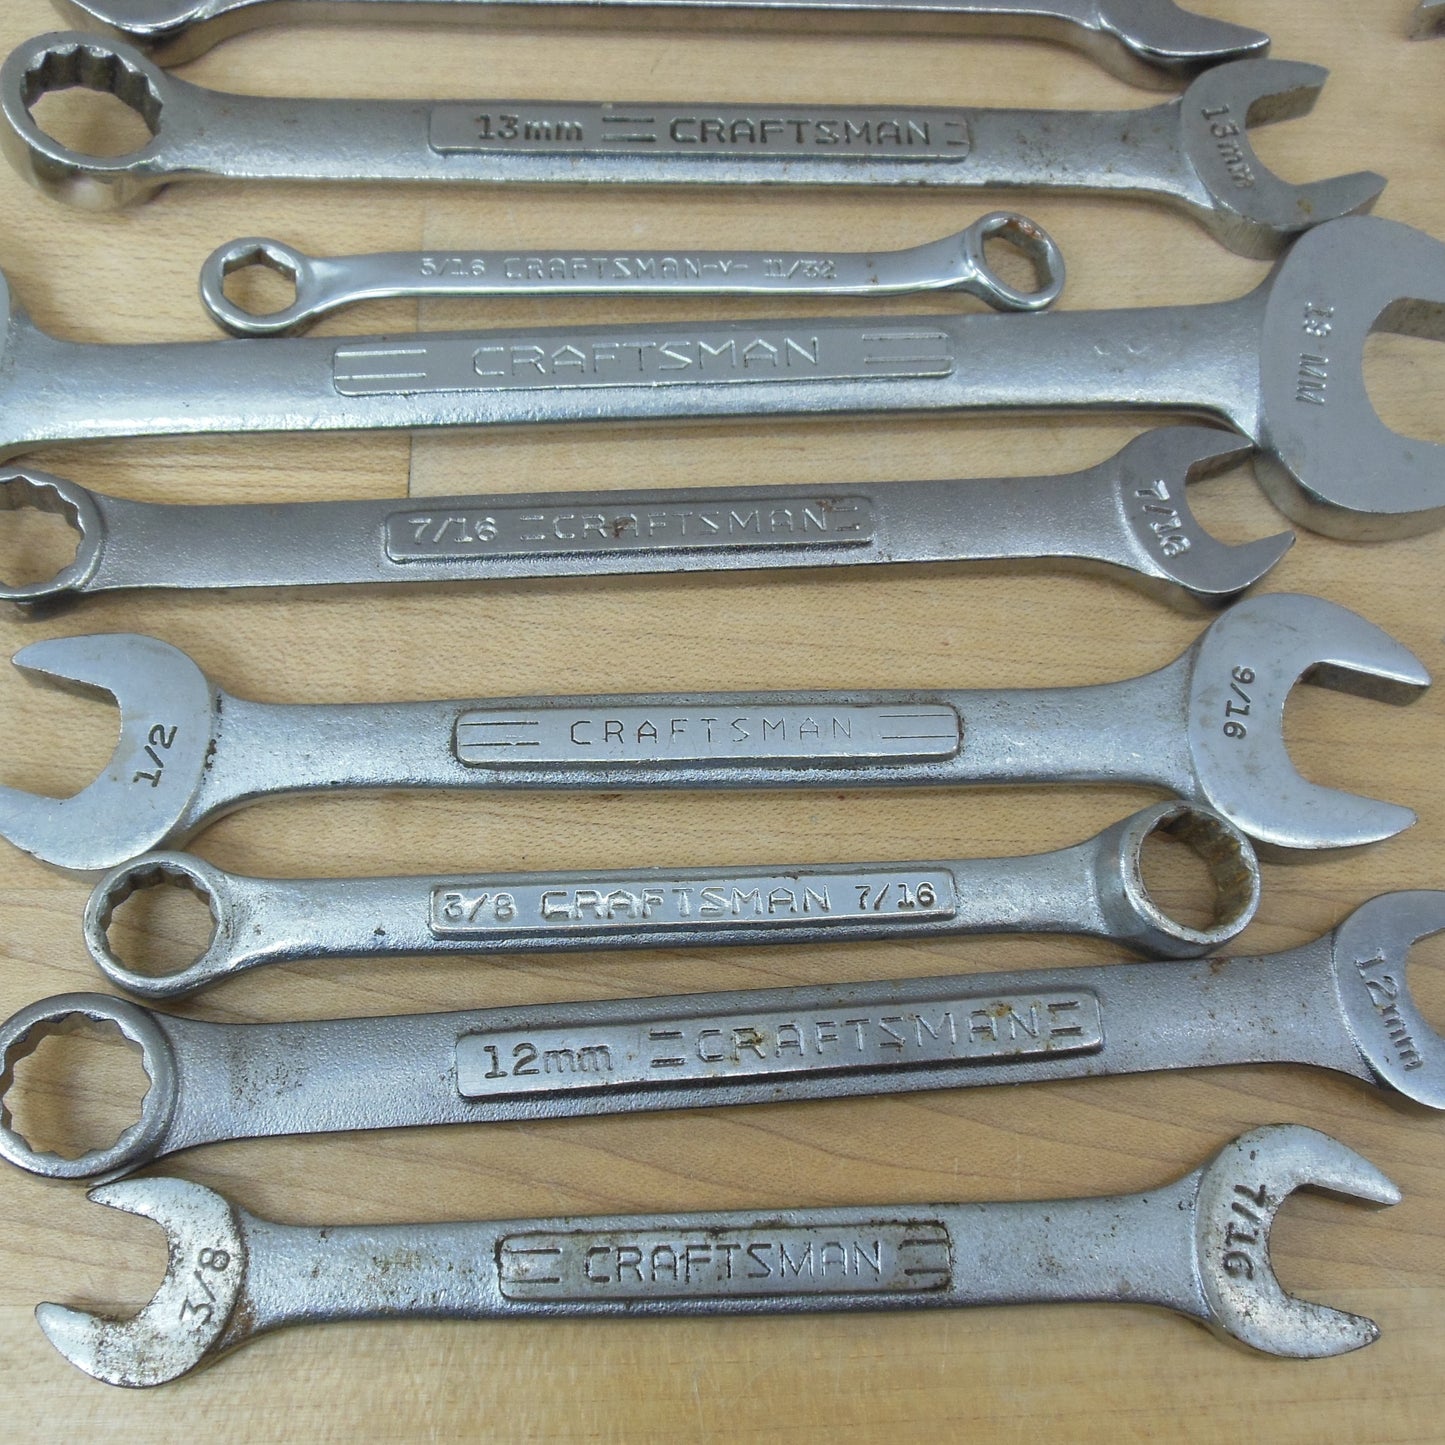 Mixed Maker 24 Lot Wrenches Open Combo Box - Craftsman Snap-on S-K Proto Challenger Etc. Used